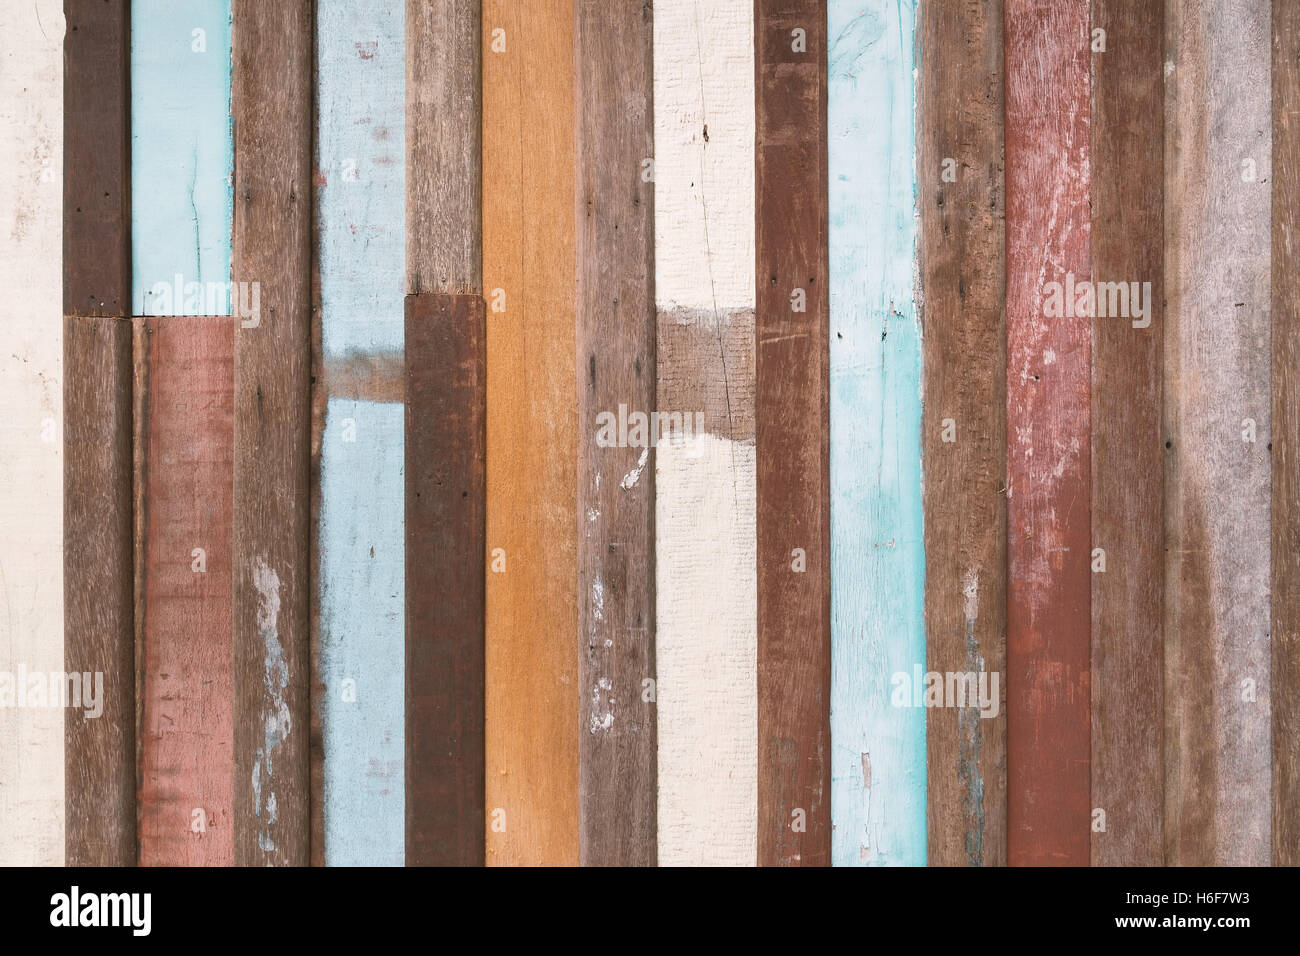 Wood material background for Vintage wallpaper Stock Photo